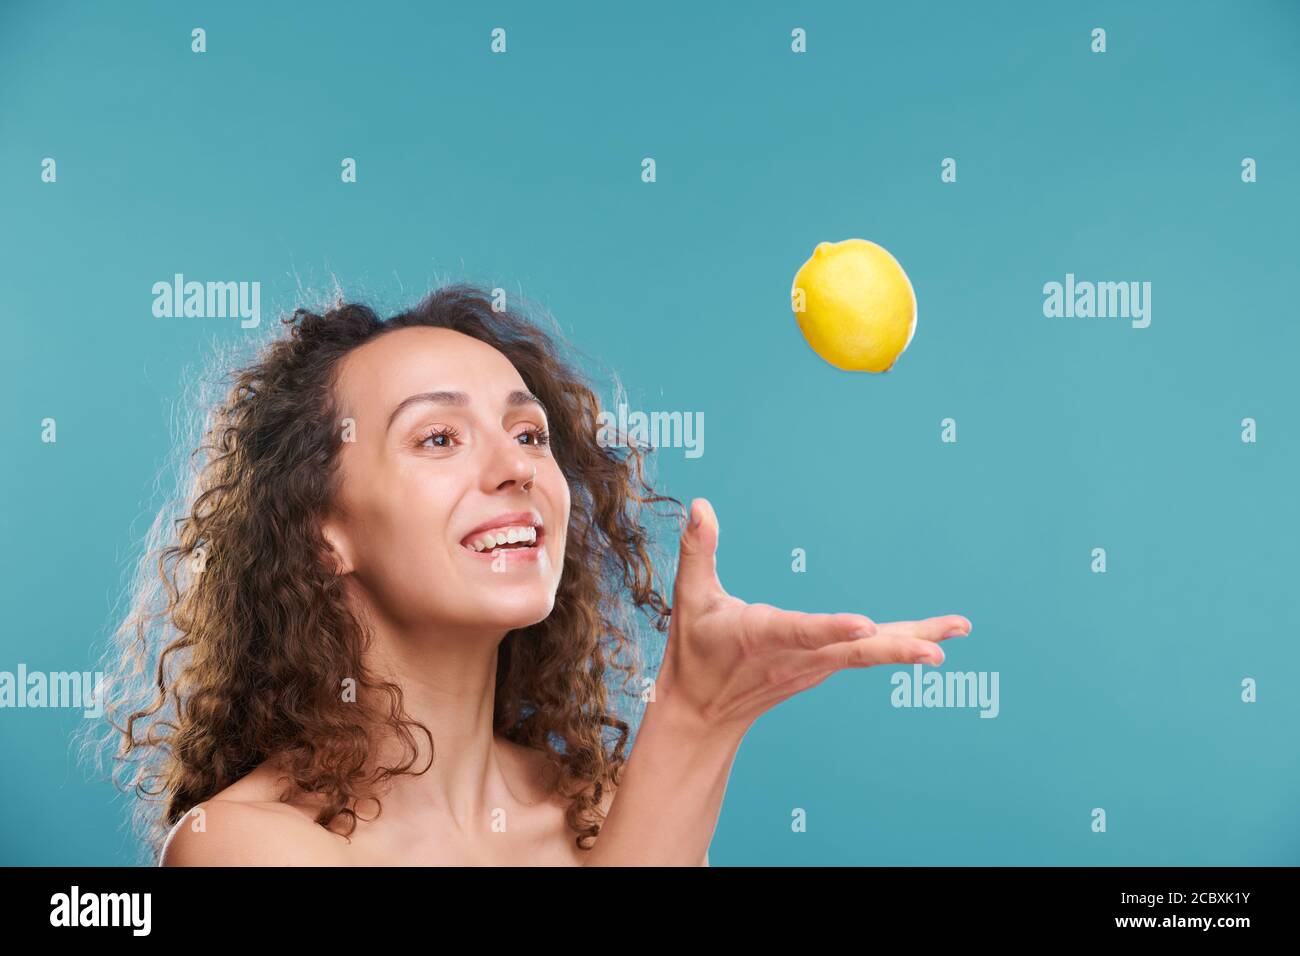 Young joyful woman with toothy smile and dark wavy hair throwing fresh lemon Stock Photo